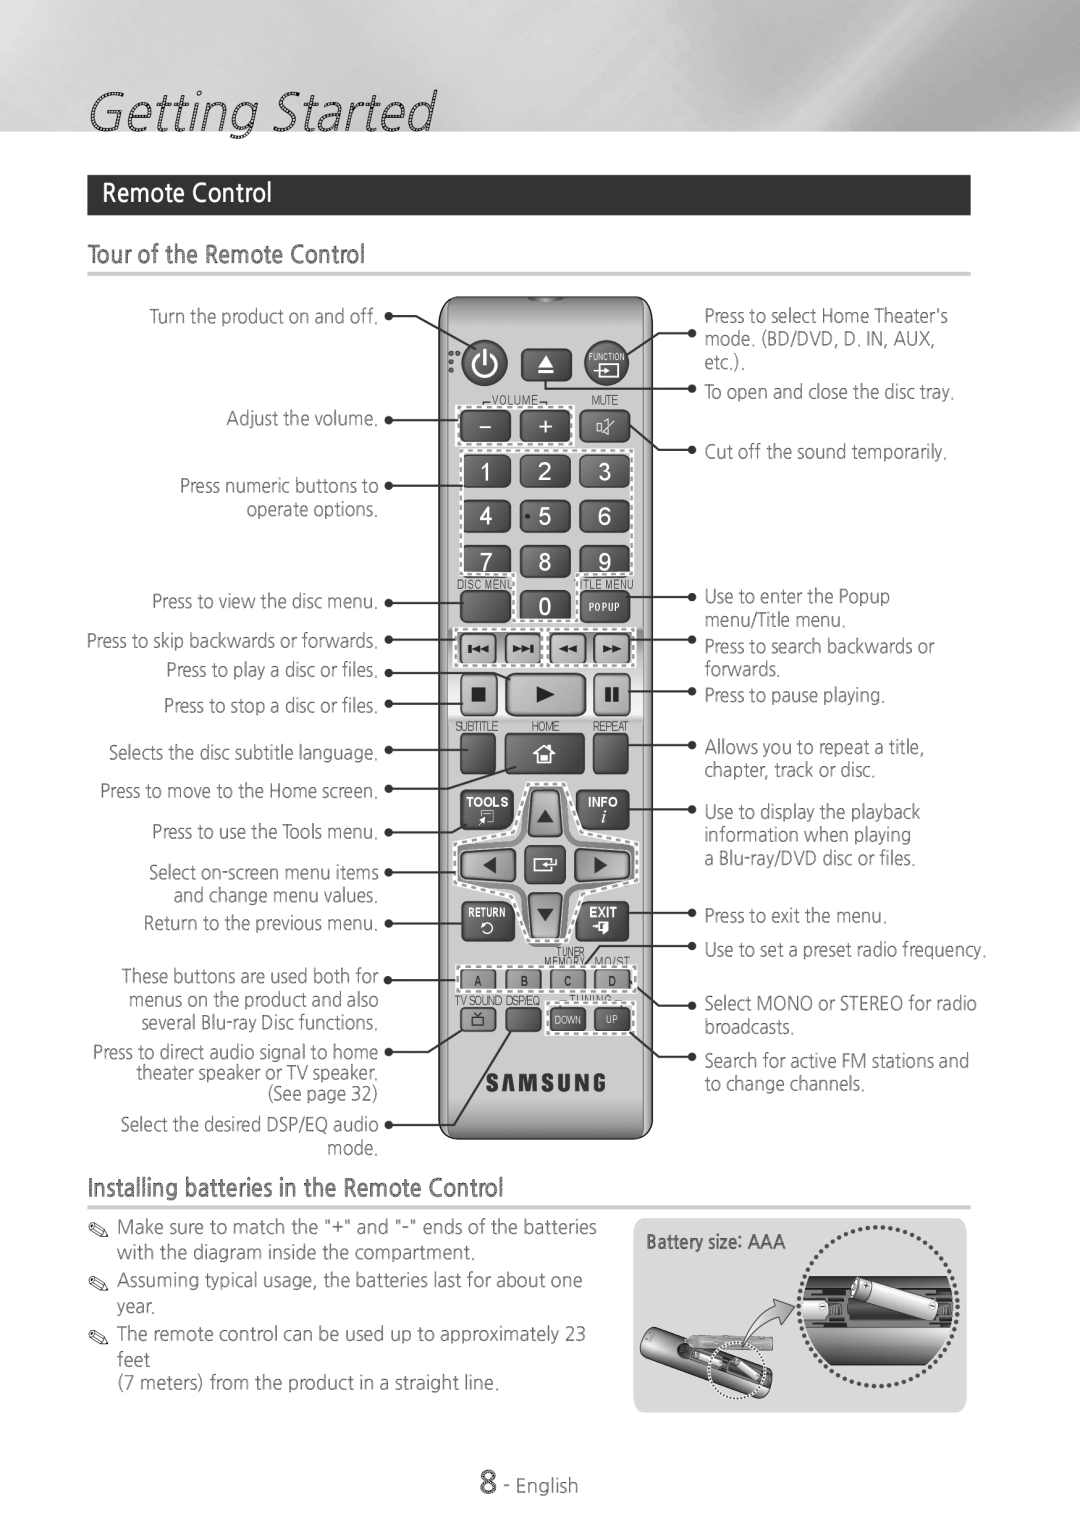 Samsung HTH5500 user manual Tour of the Remote Control, Installing batteries in the Remote Control, Getting Started 